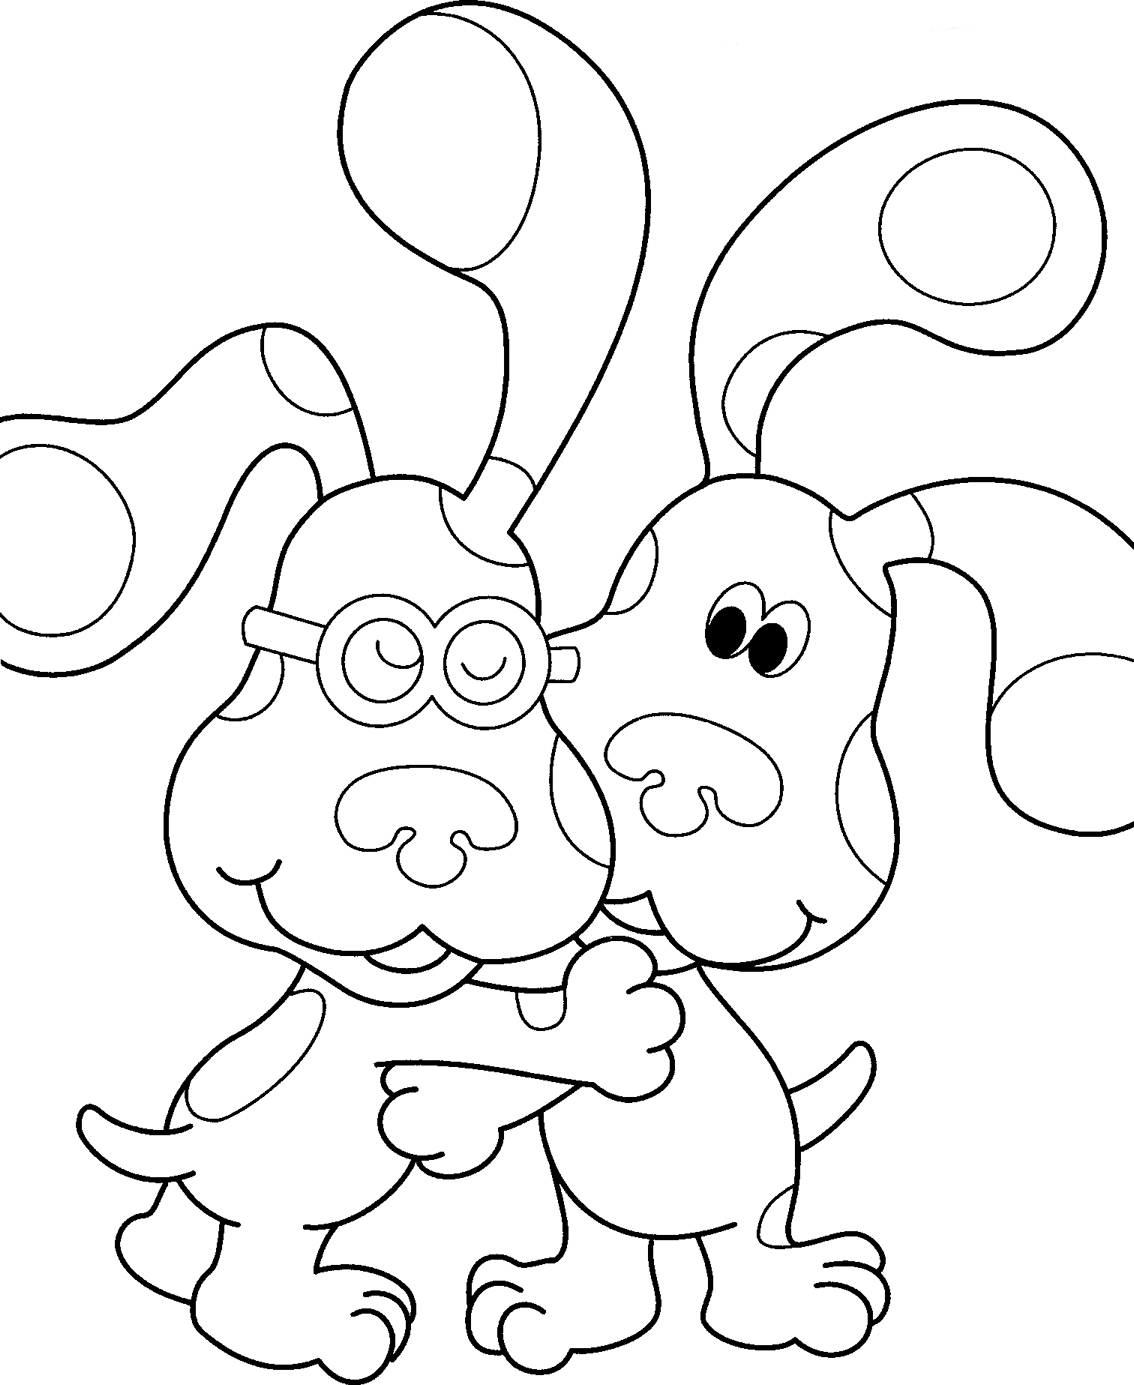 printable blues clues coloring pages